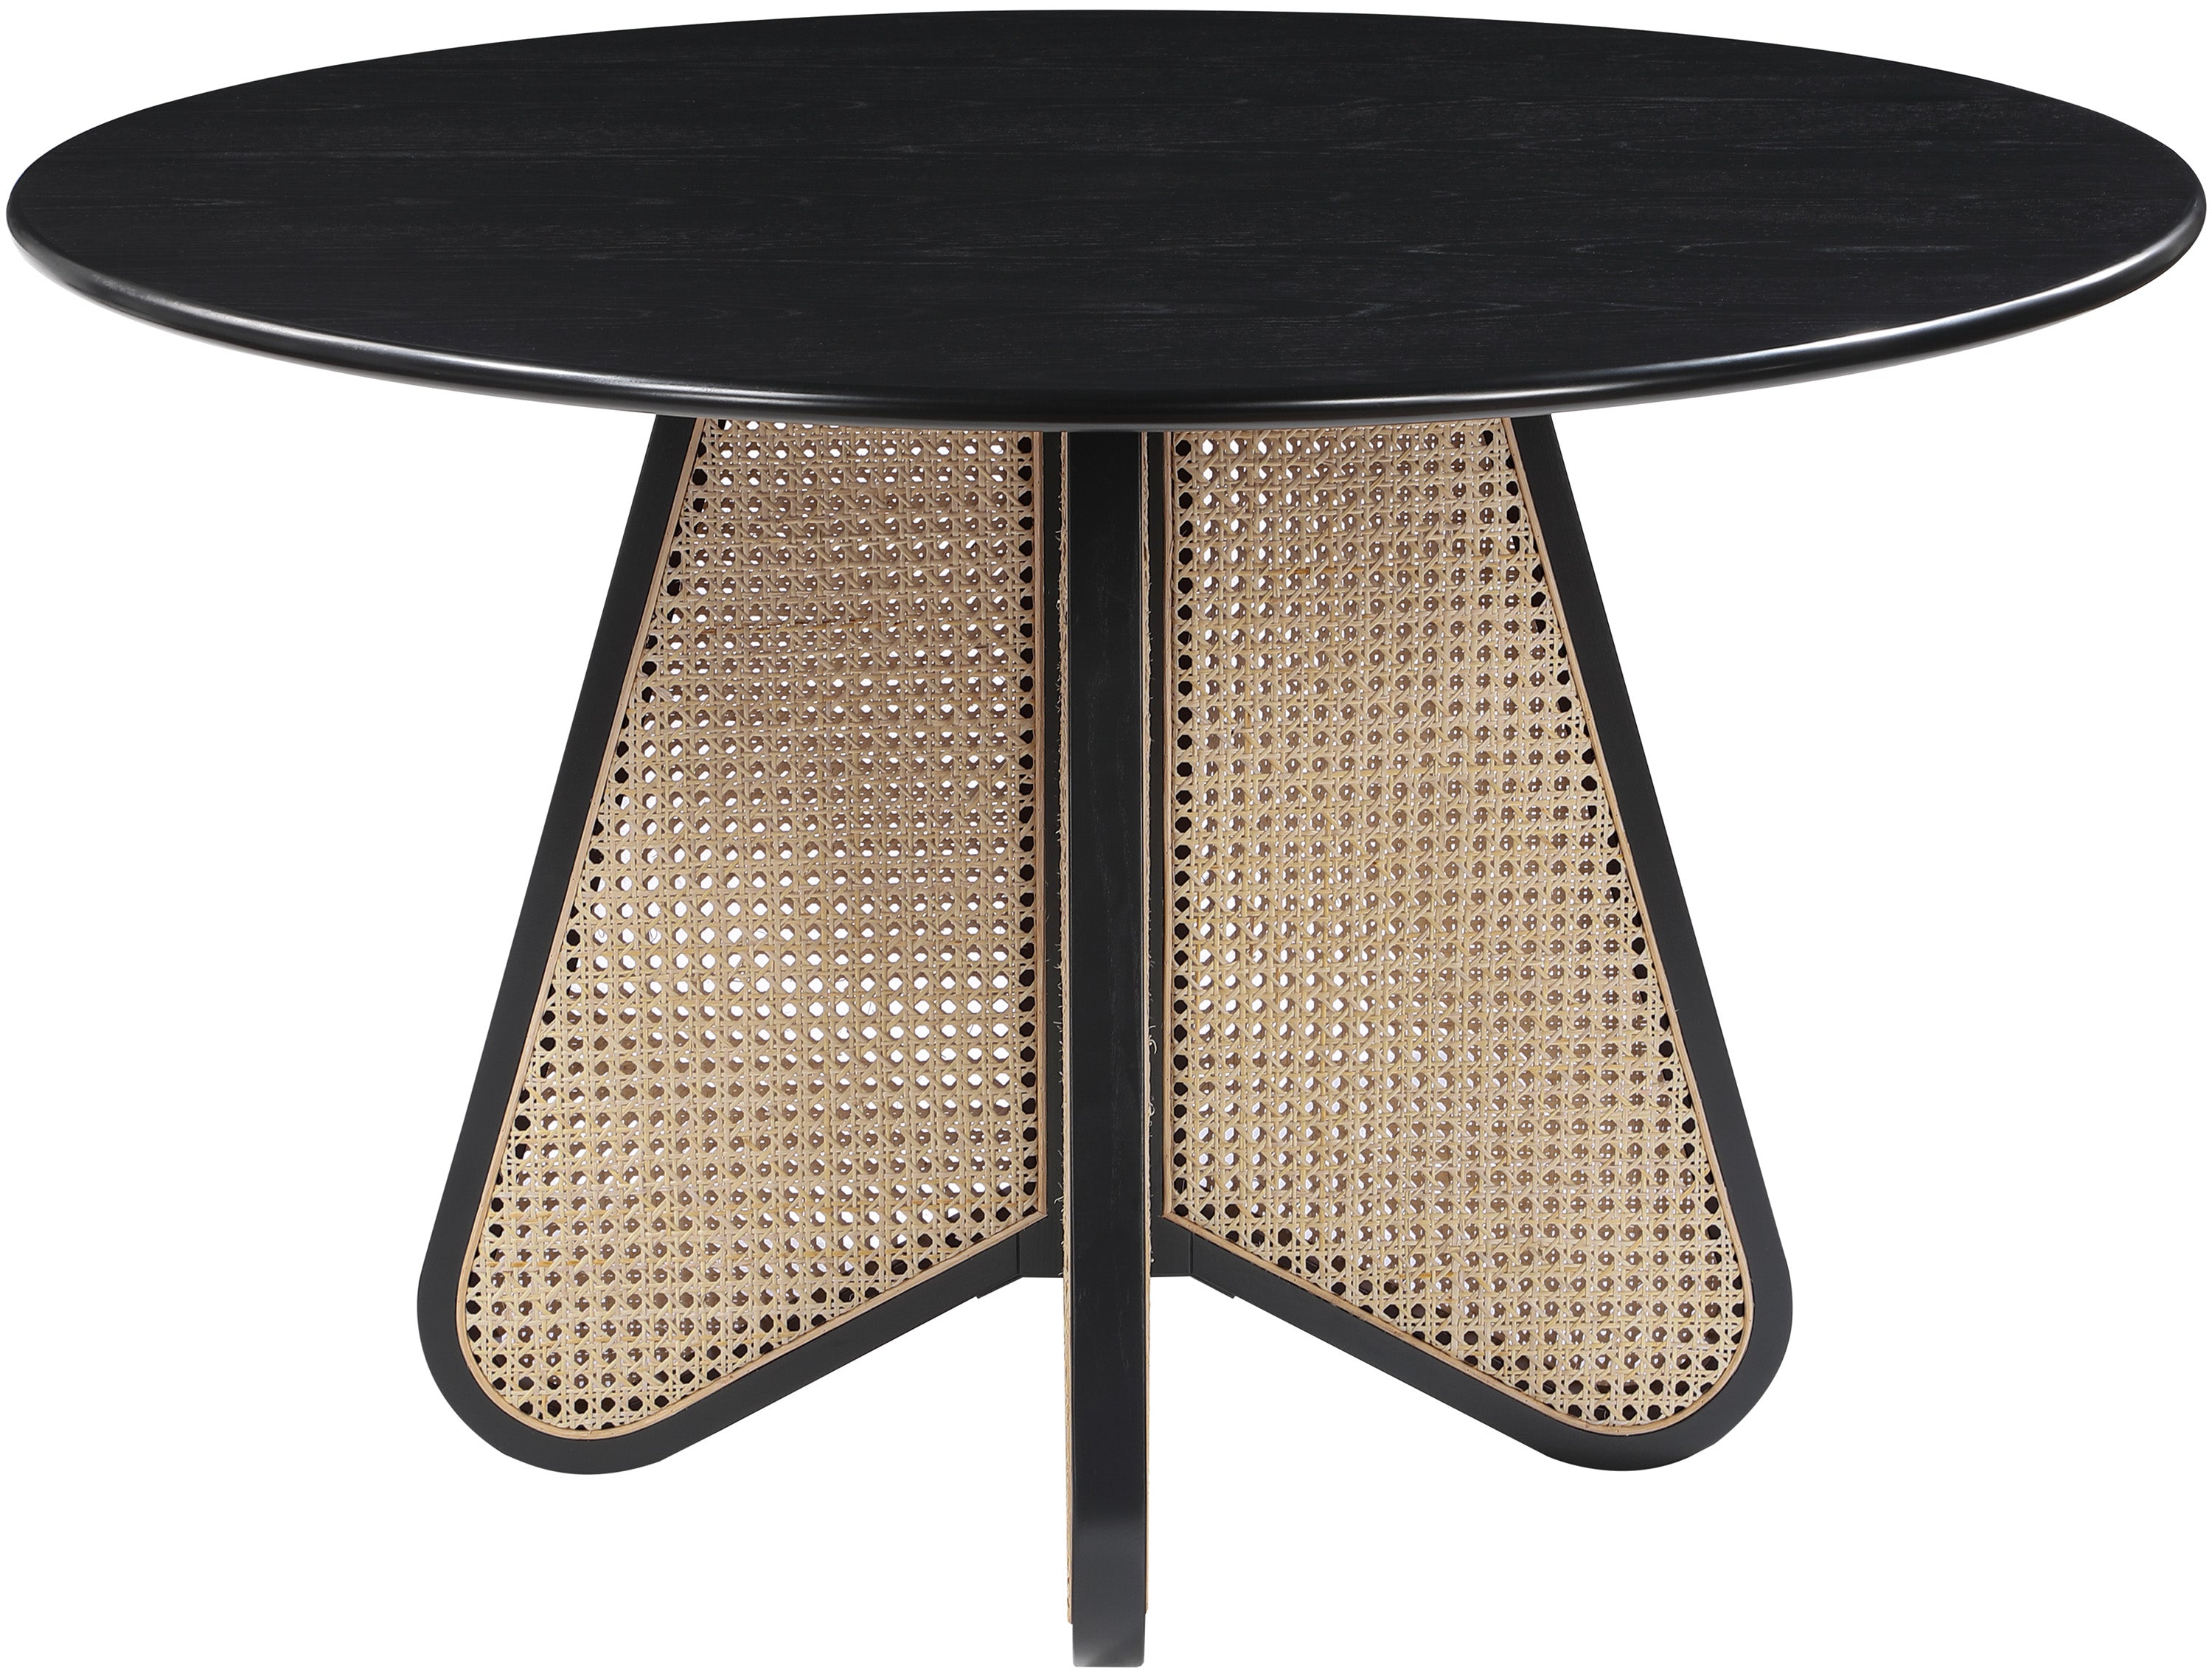 BUTTERFLY DINING TABLE - BLACK